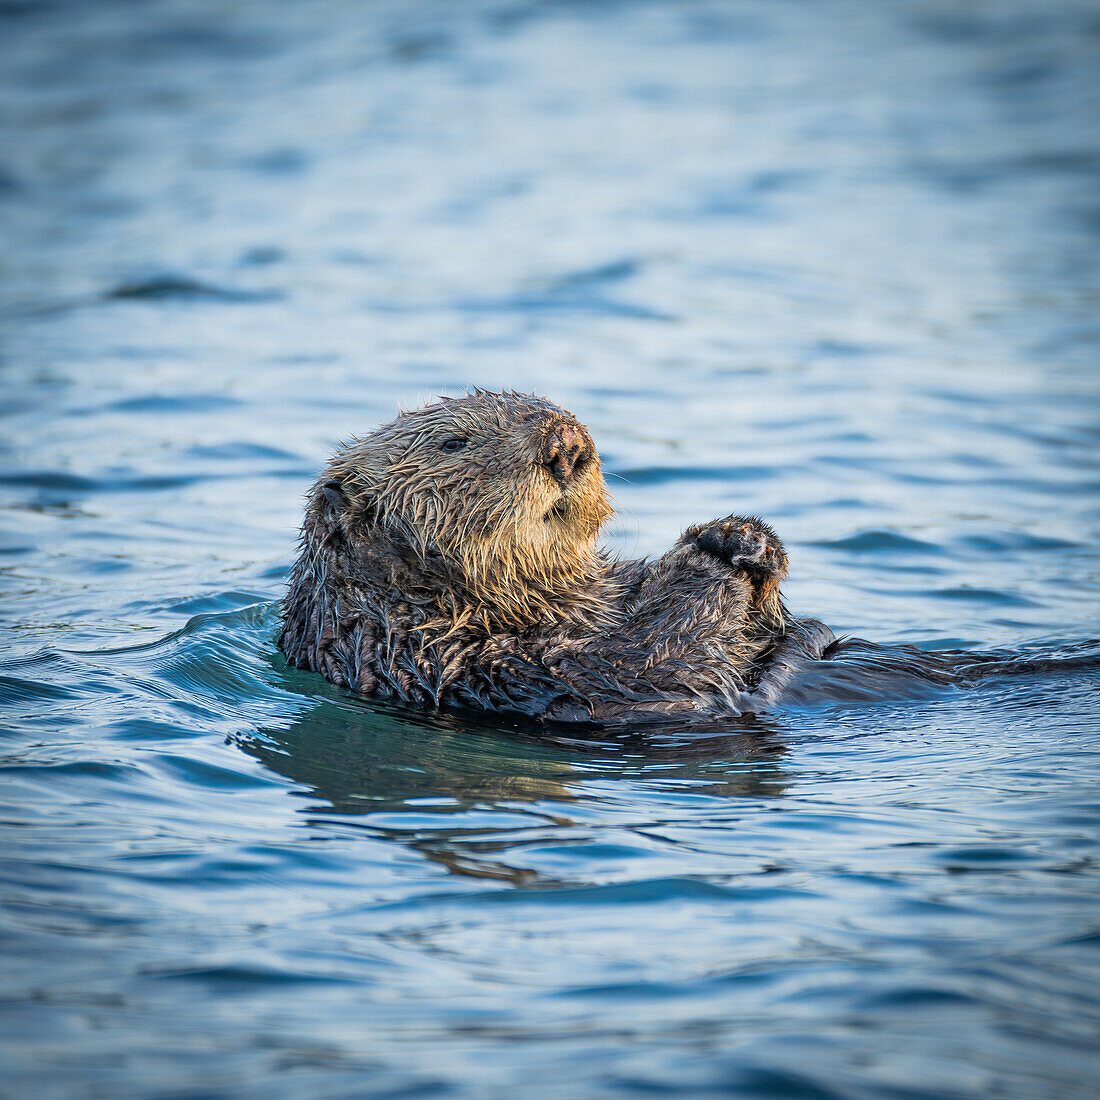 Sea otter cannot be disturbed; Canada, British Columbia, Vancouver Island